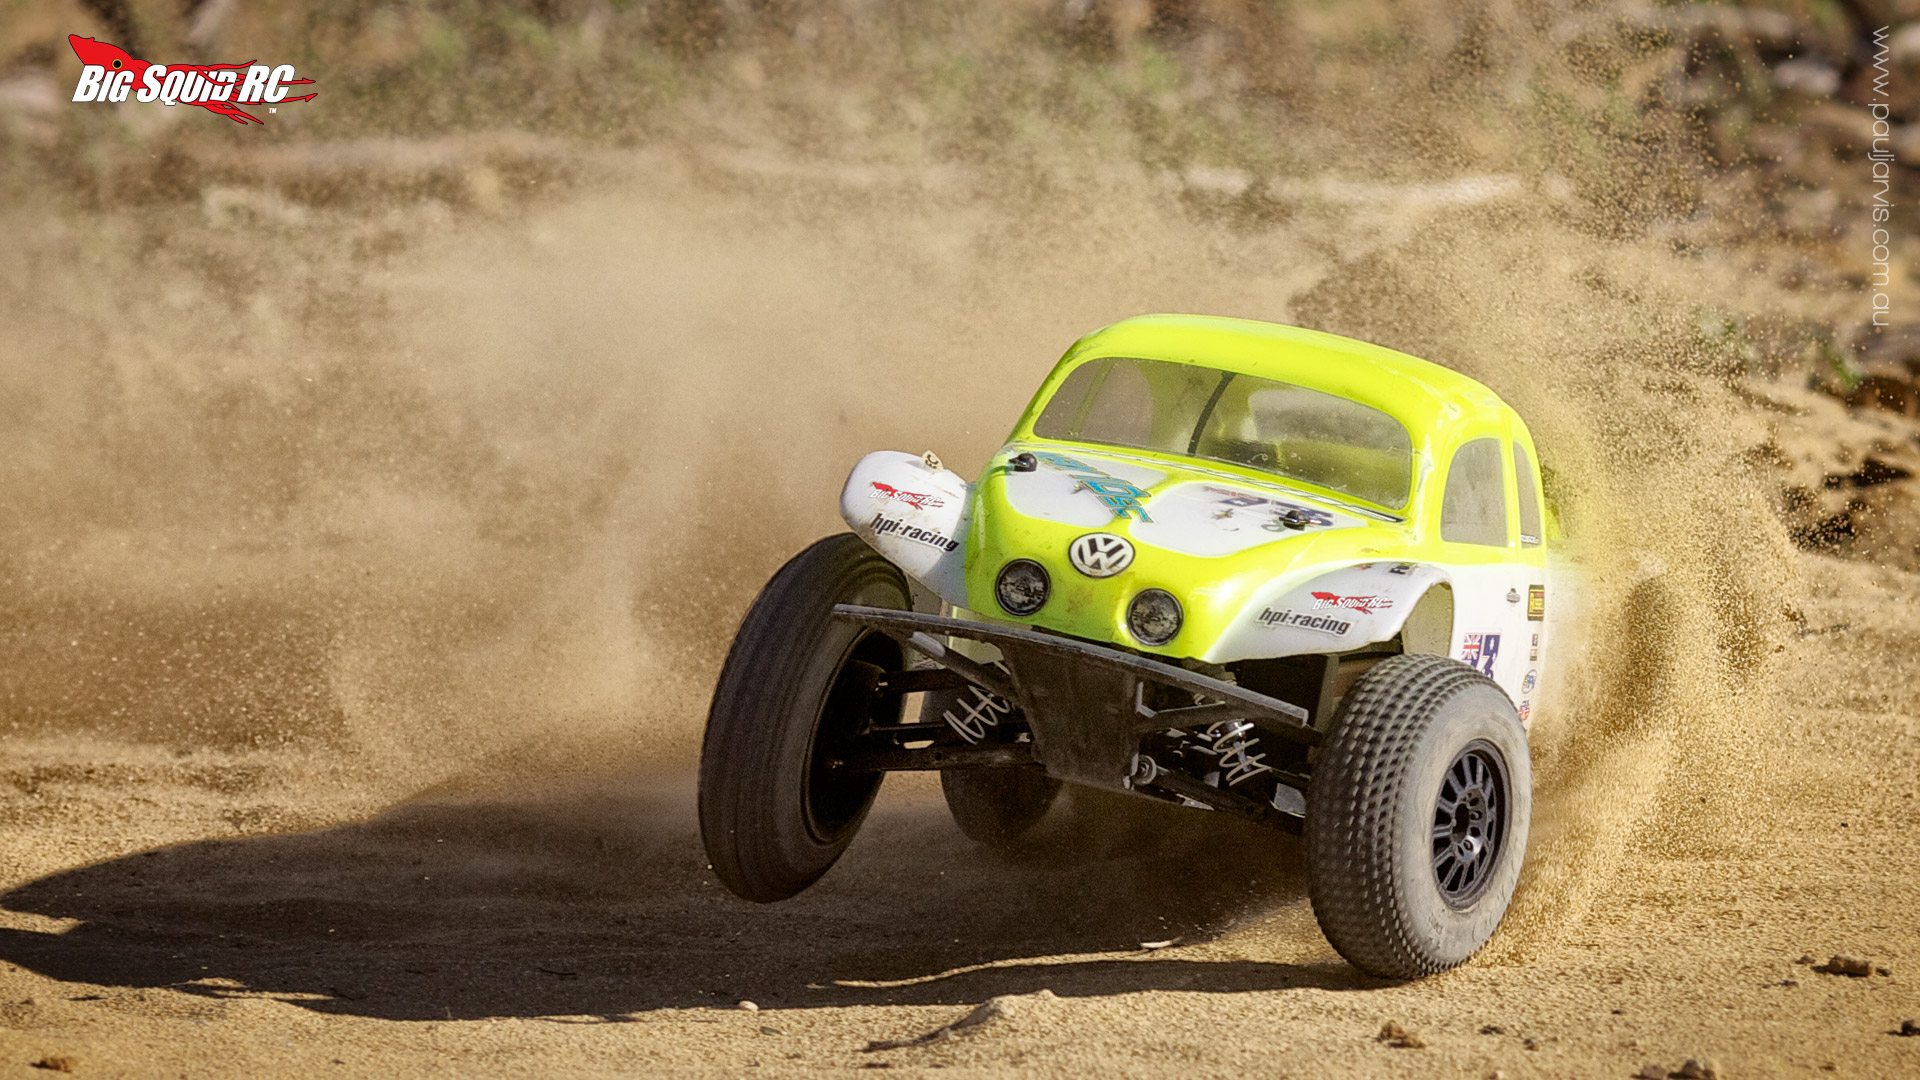 Awesome Sand Action Wallpaper Big Squid Rc Car And Truck